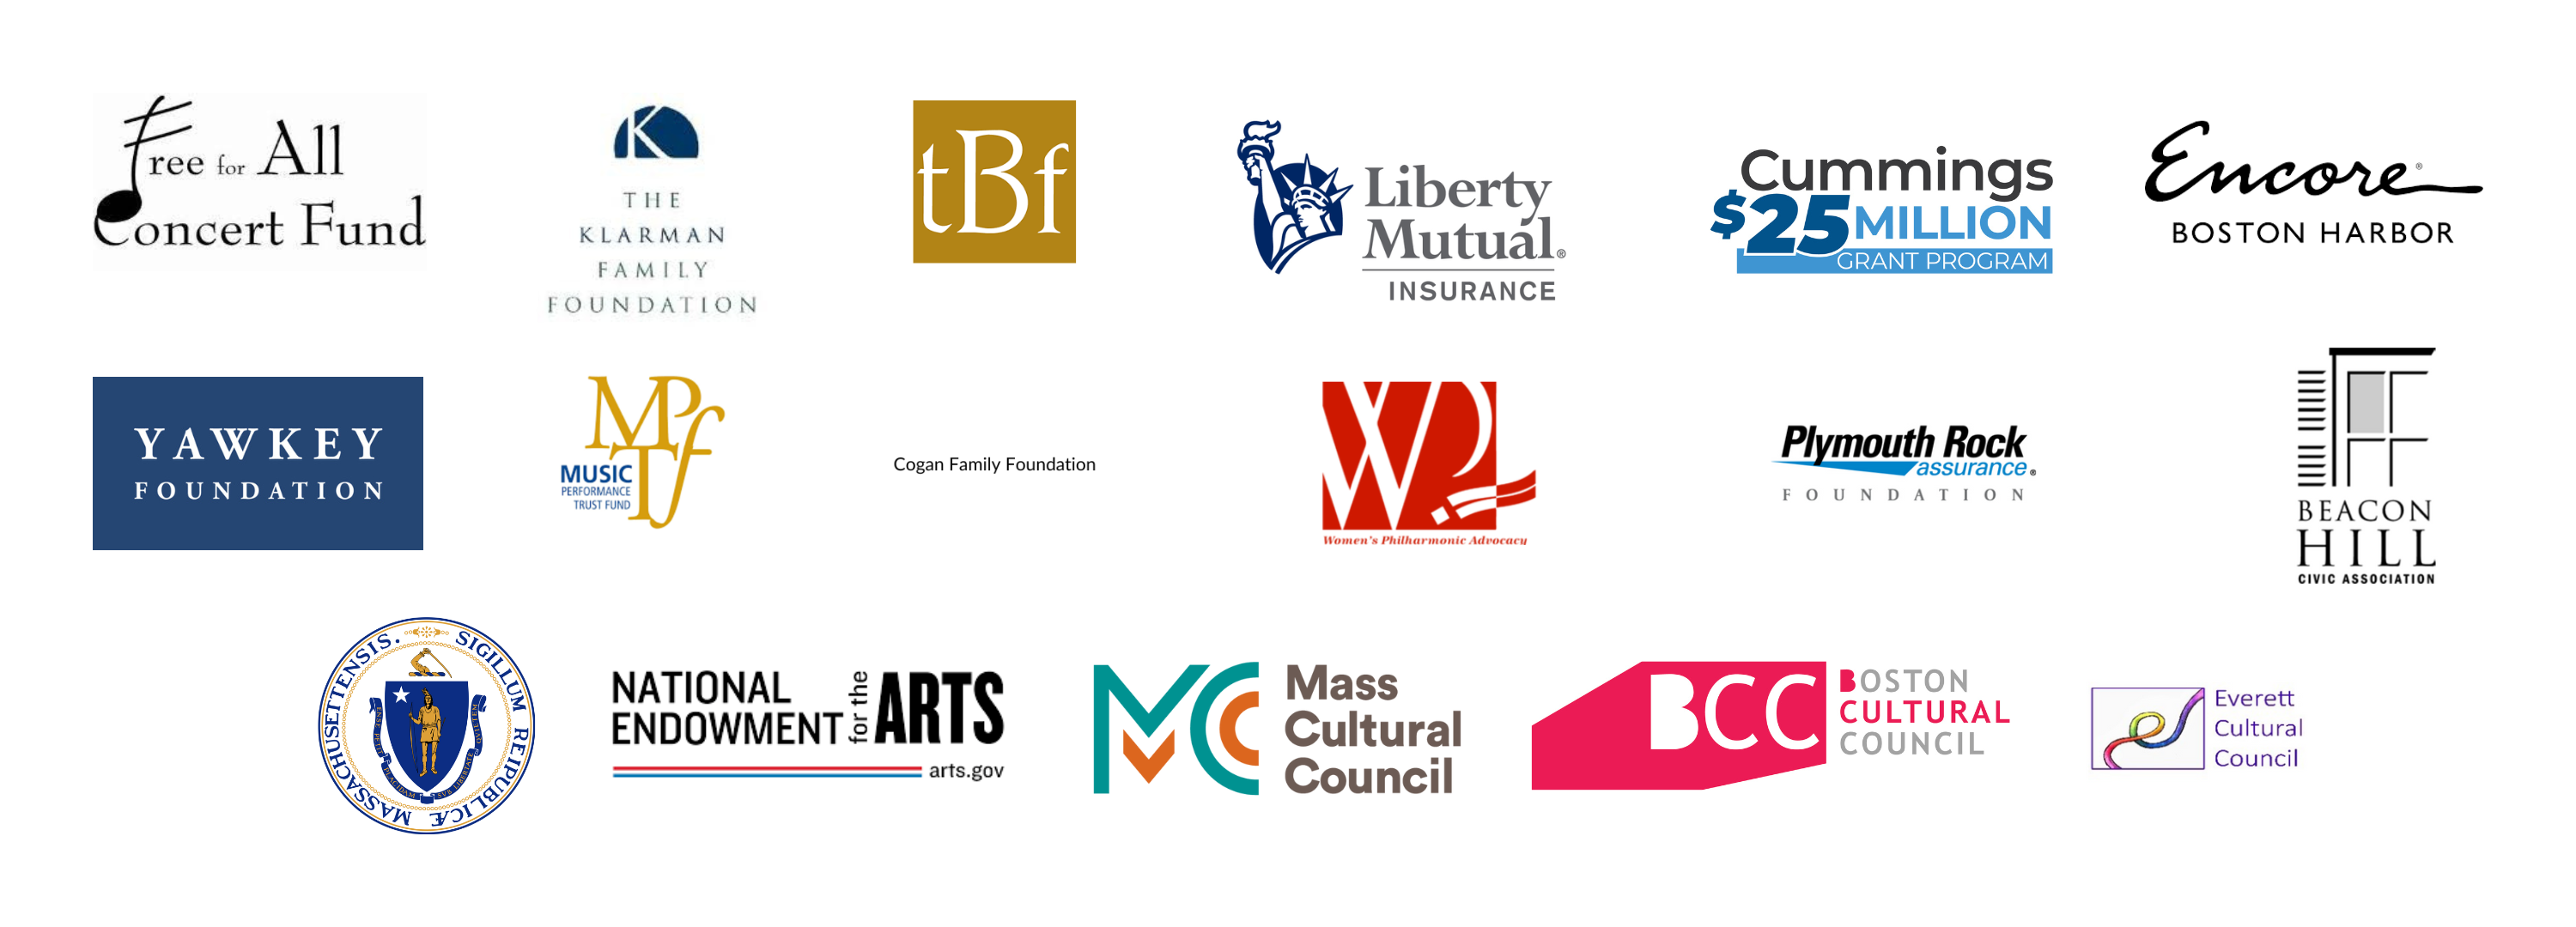 Logos of foundations, corporations, and government programs that support Landmarks